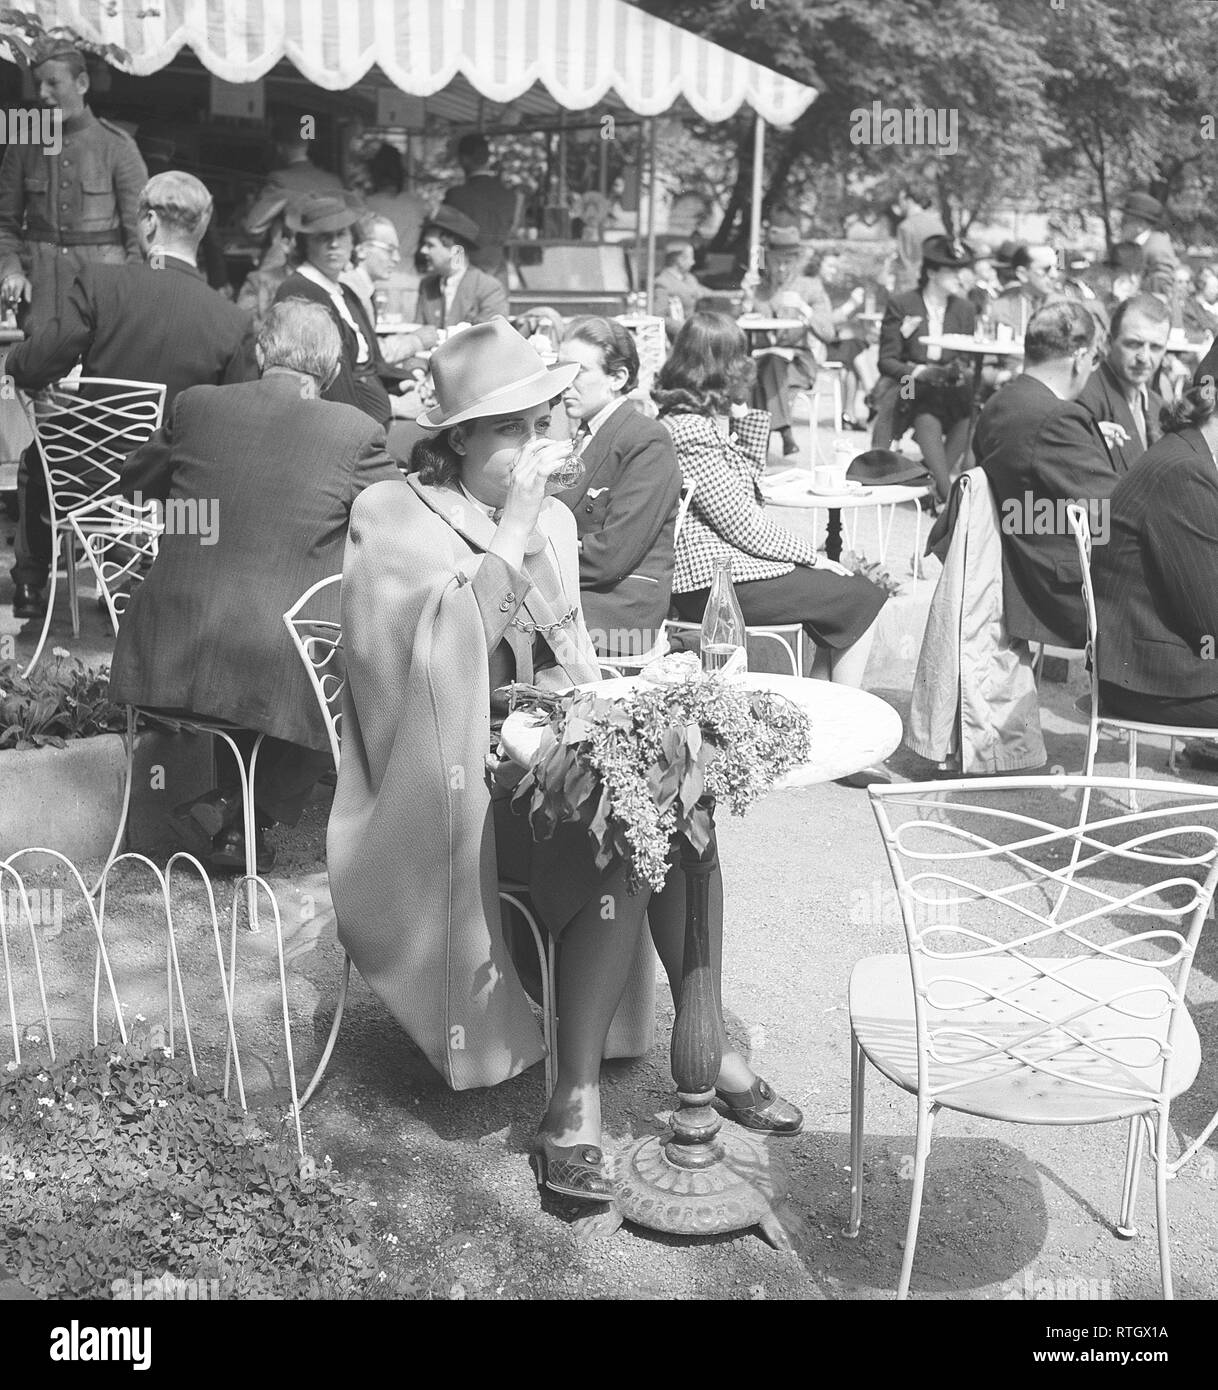 1940s lifestyle. A young women at an outdoor café. She is model and ballet dancer Gina Ohlsson.  Sweden. Photo Kristoffersson Ref 134-4. Sweden 1940 Stock Photo